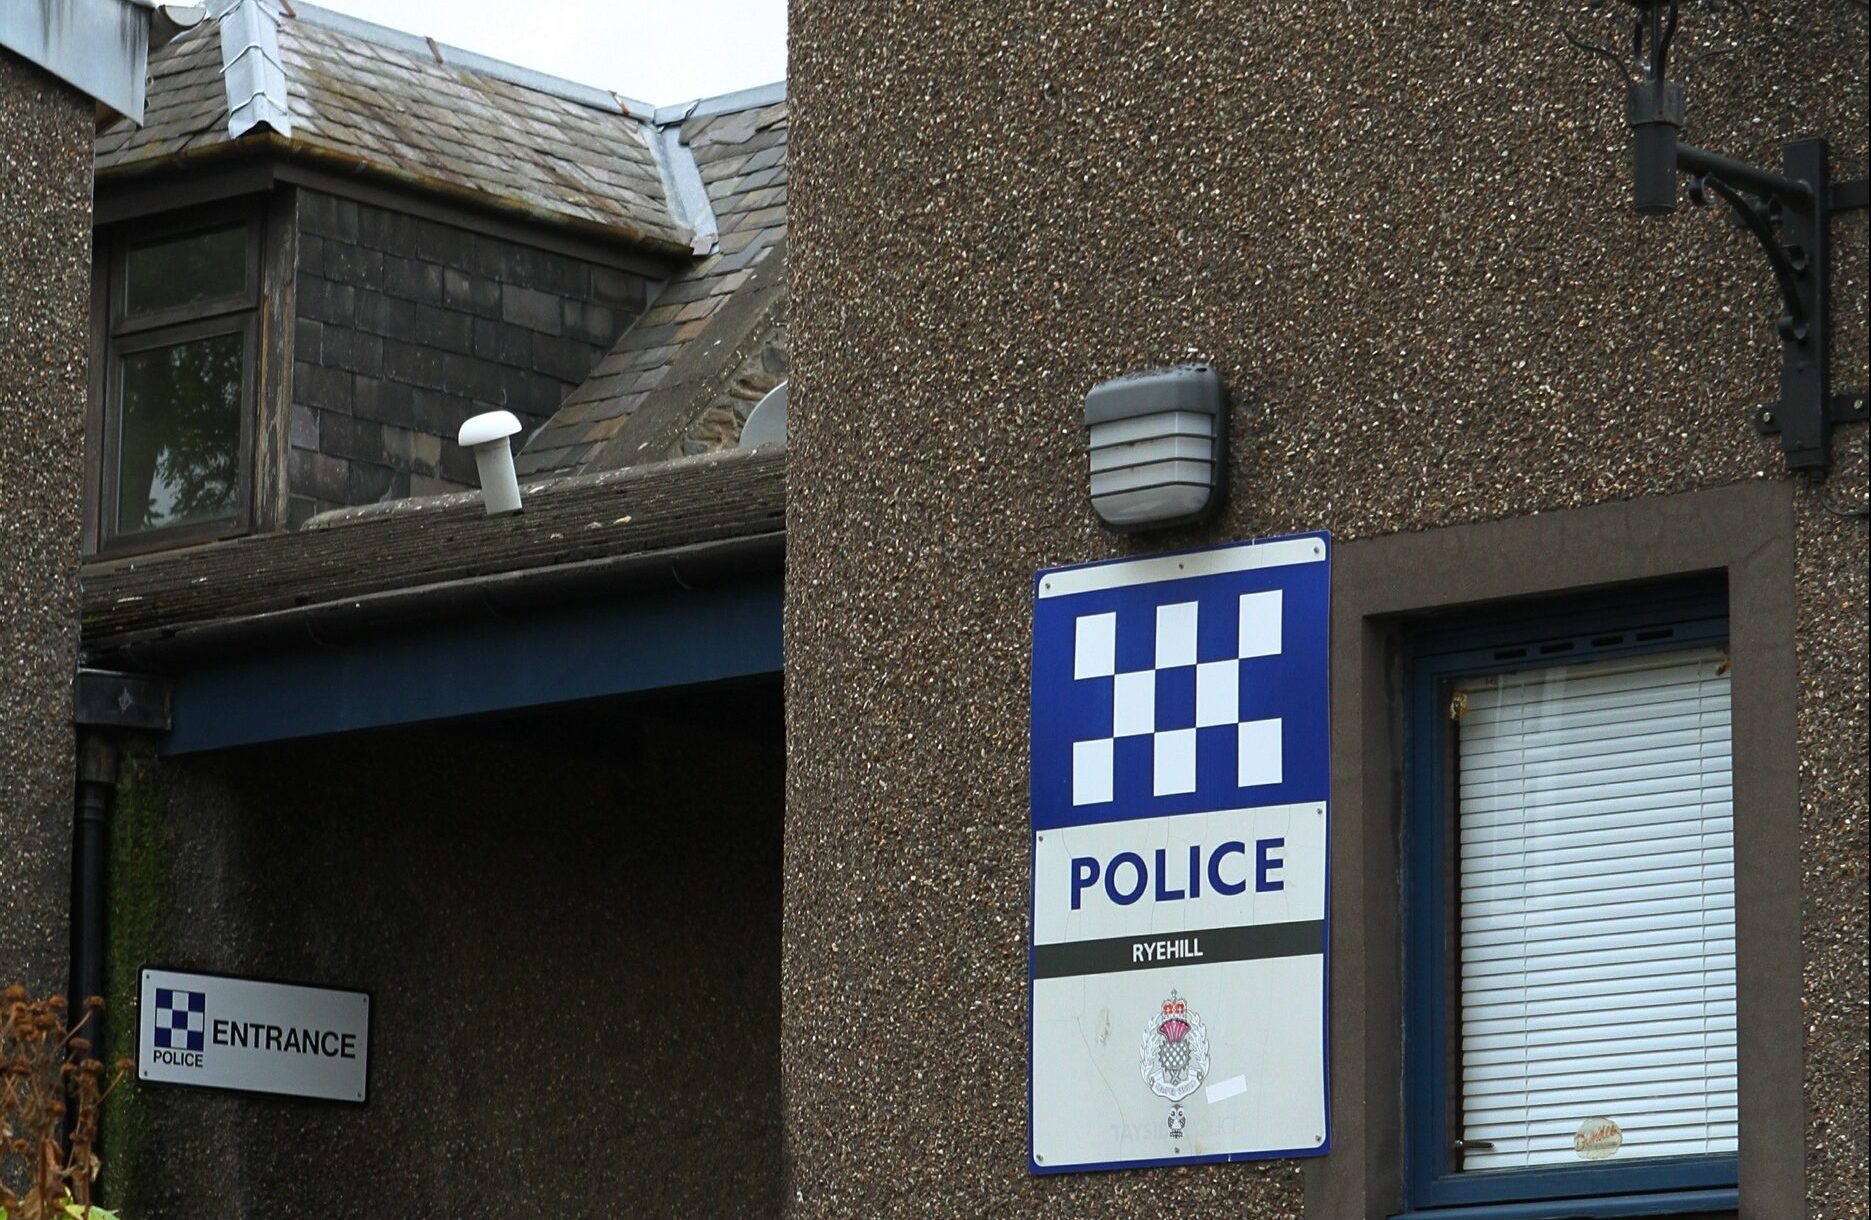 Ryehill Police Station had been set to close under Police Scotland plans.